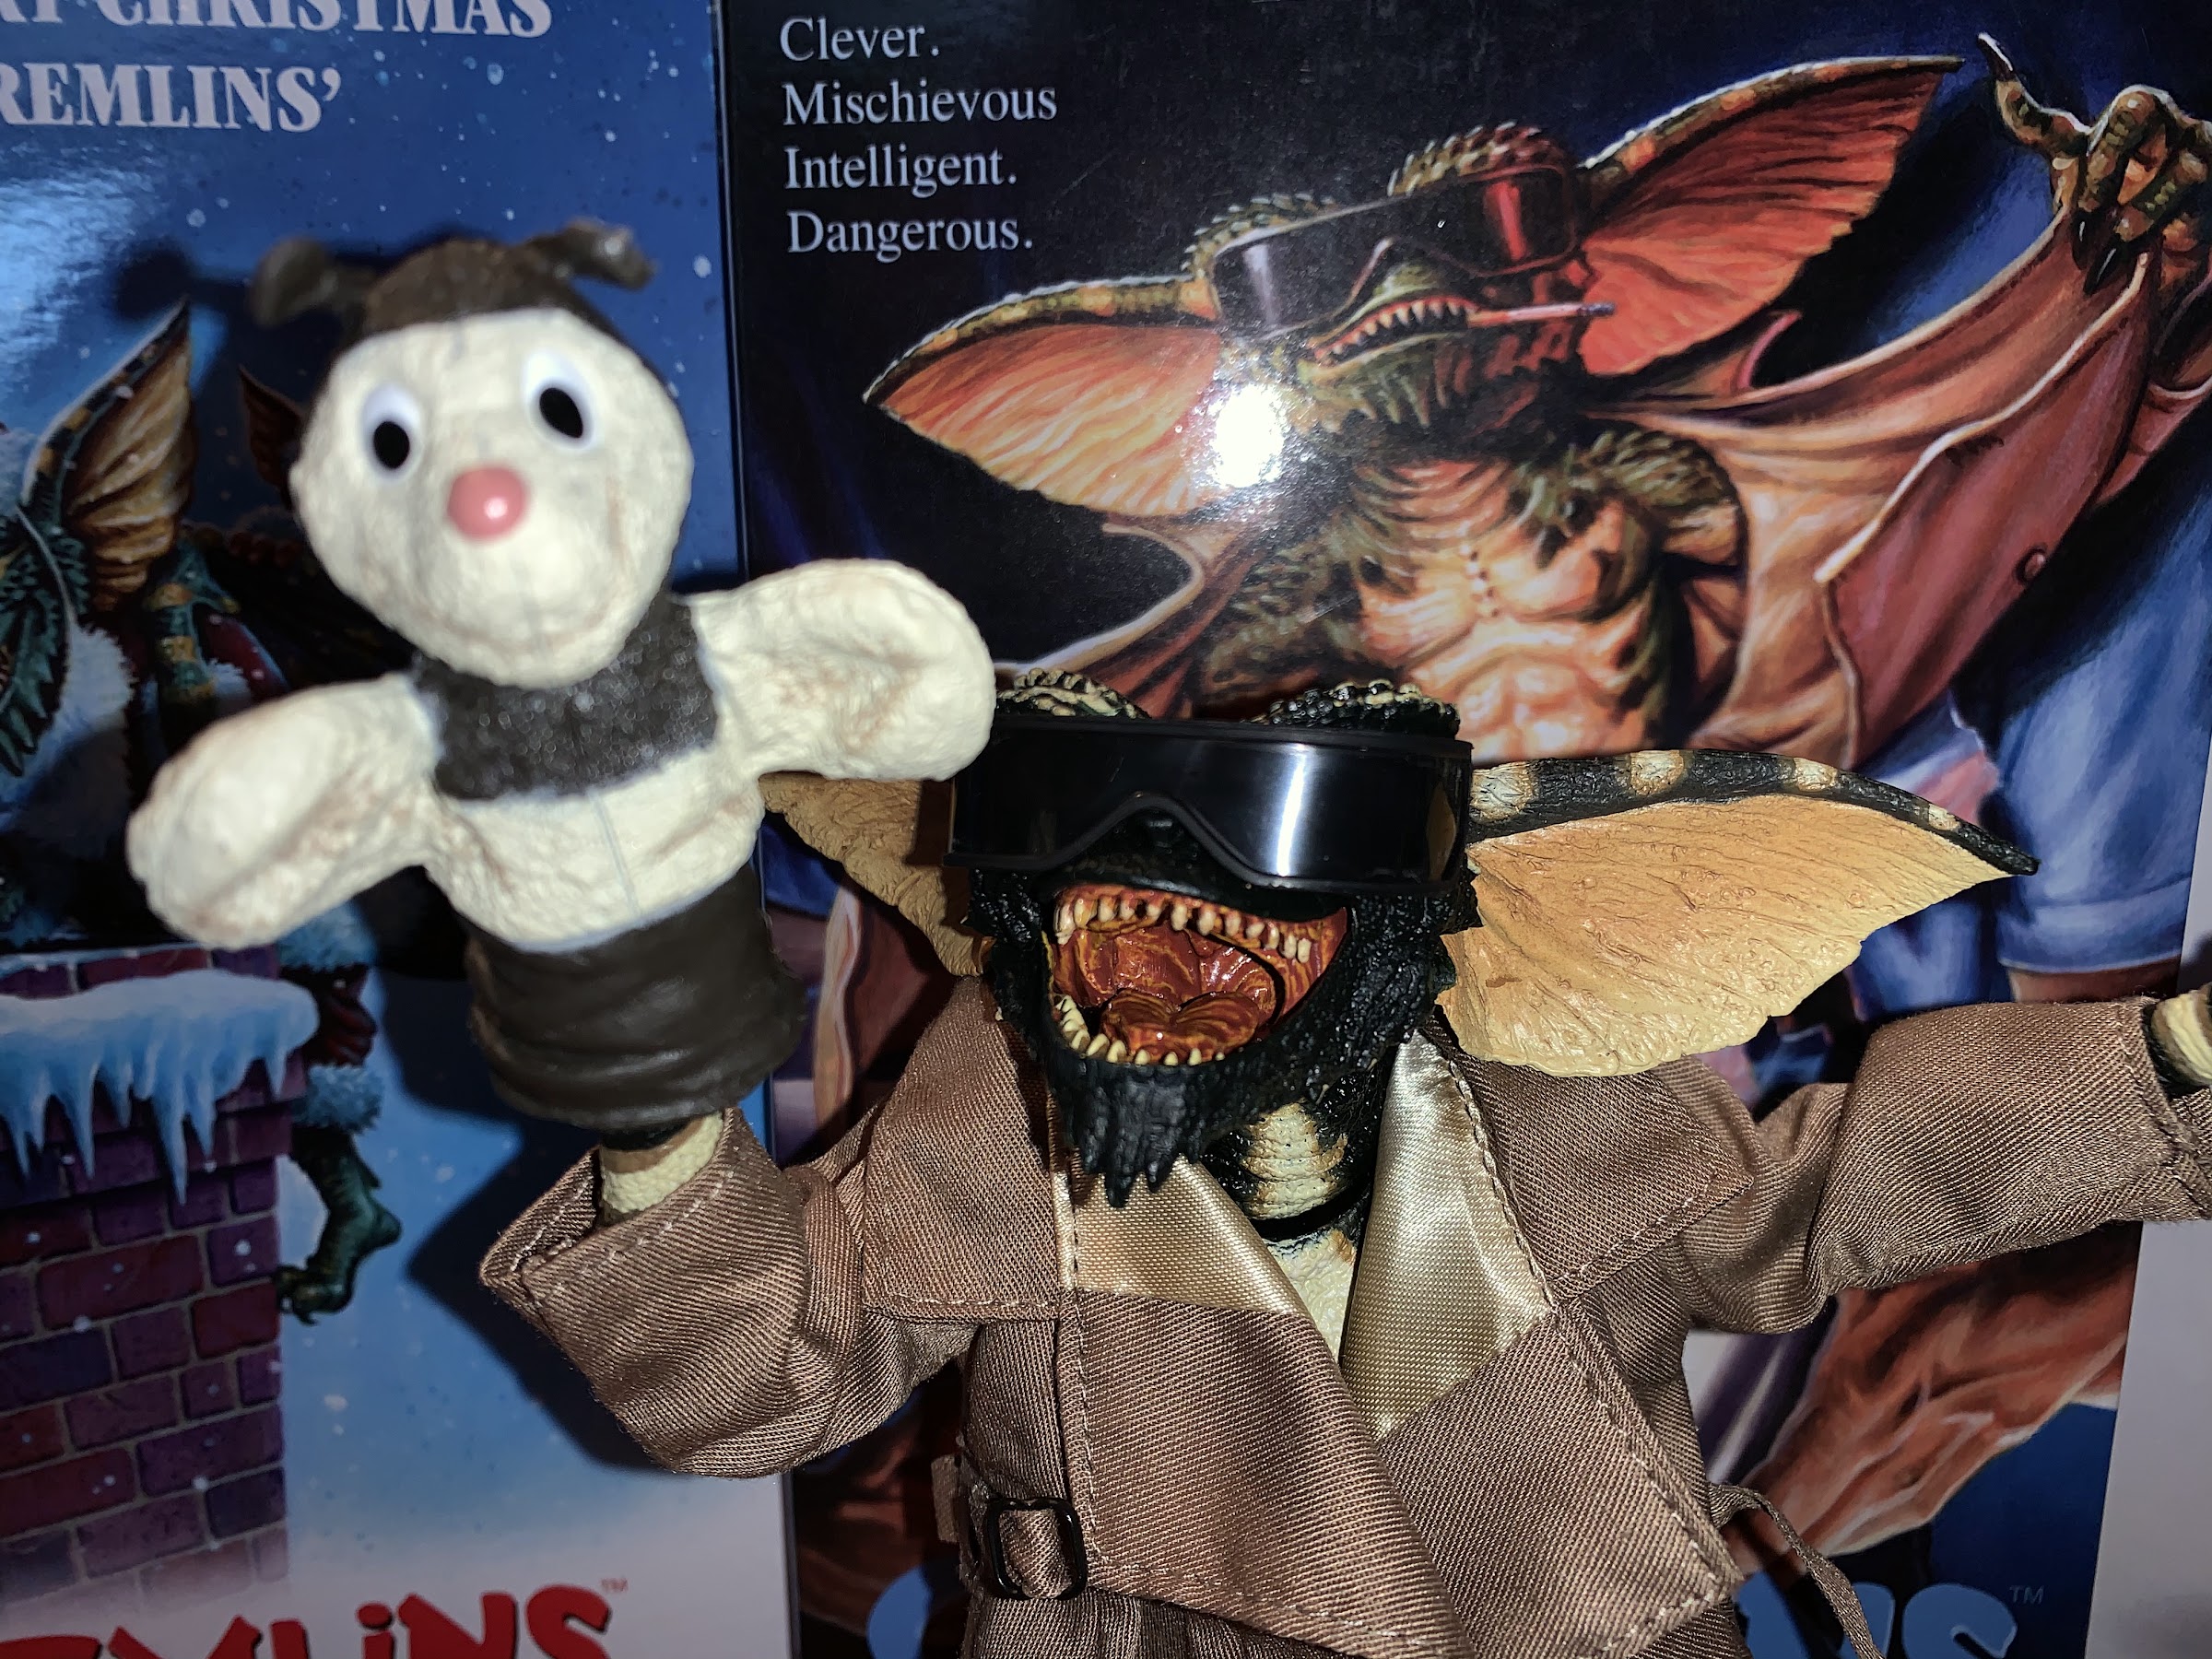 NECA Gremlins Ultimate Flasher Gremlin 7 Inch Action Figure Official NEW  BOXED